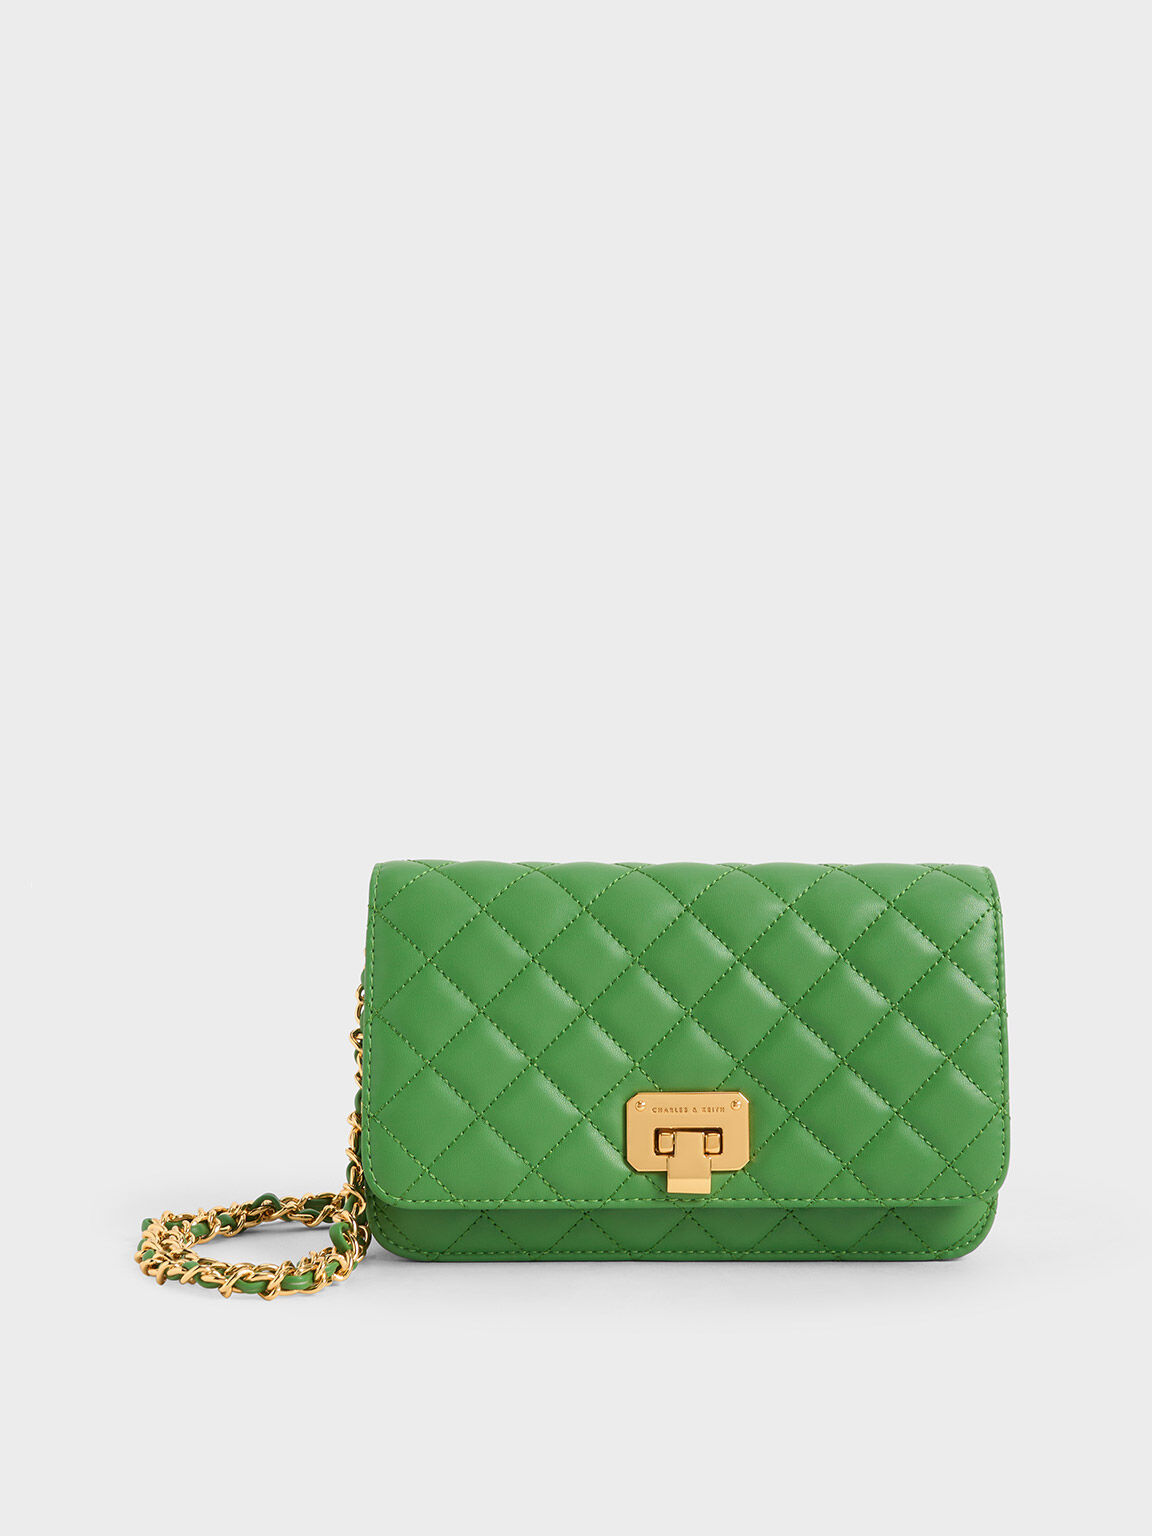 Zara Quilted Crossbody Bag Studded Small Green Purse Womens | Quilted  crossbody bag, Green purse, Crossbody bag